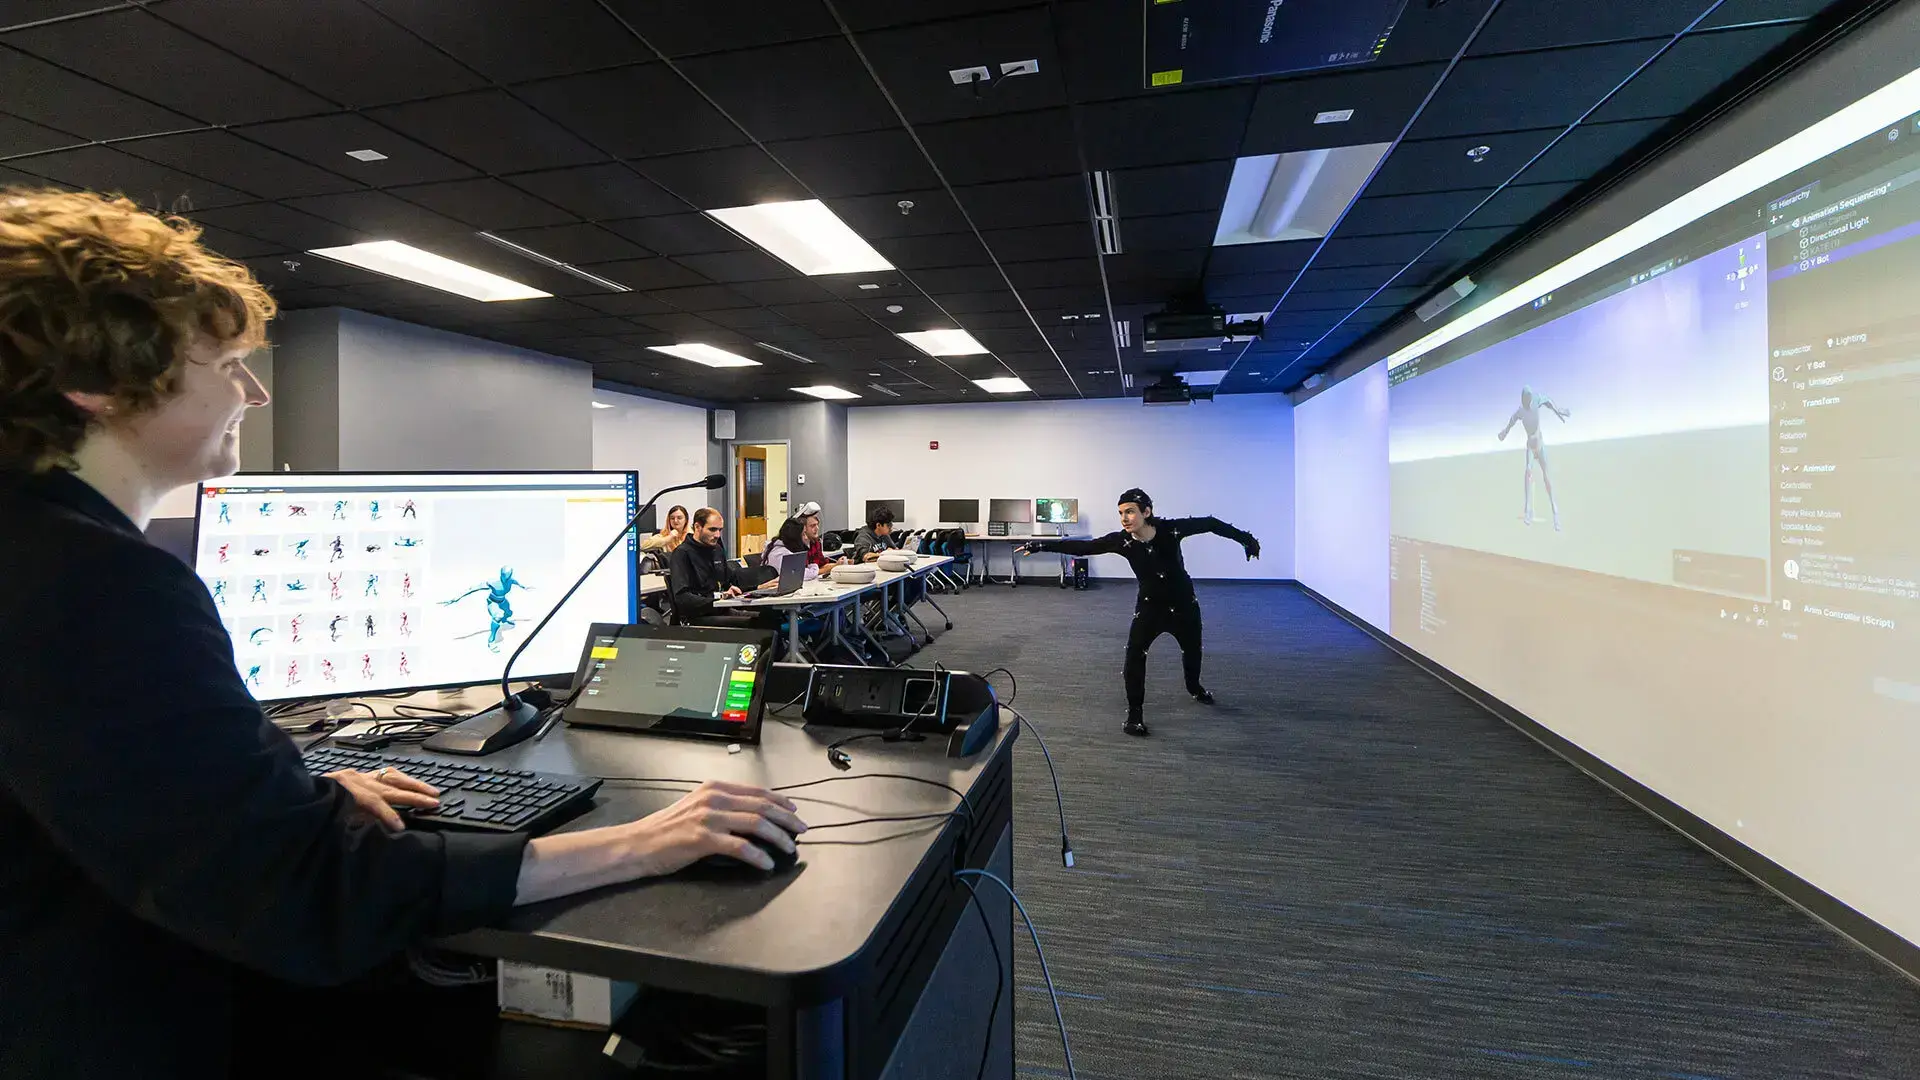 Andrei Davydov '25, a studio art and immersive media design double major, demonstrates how to use a motion capture suit